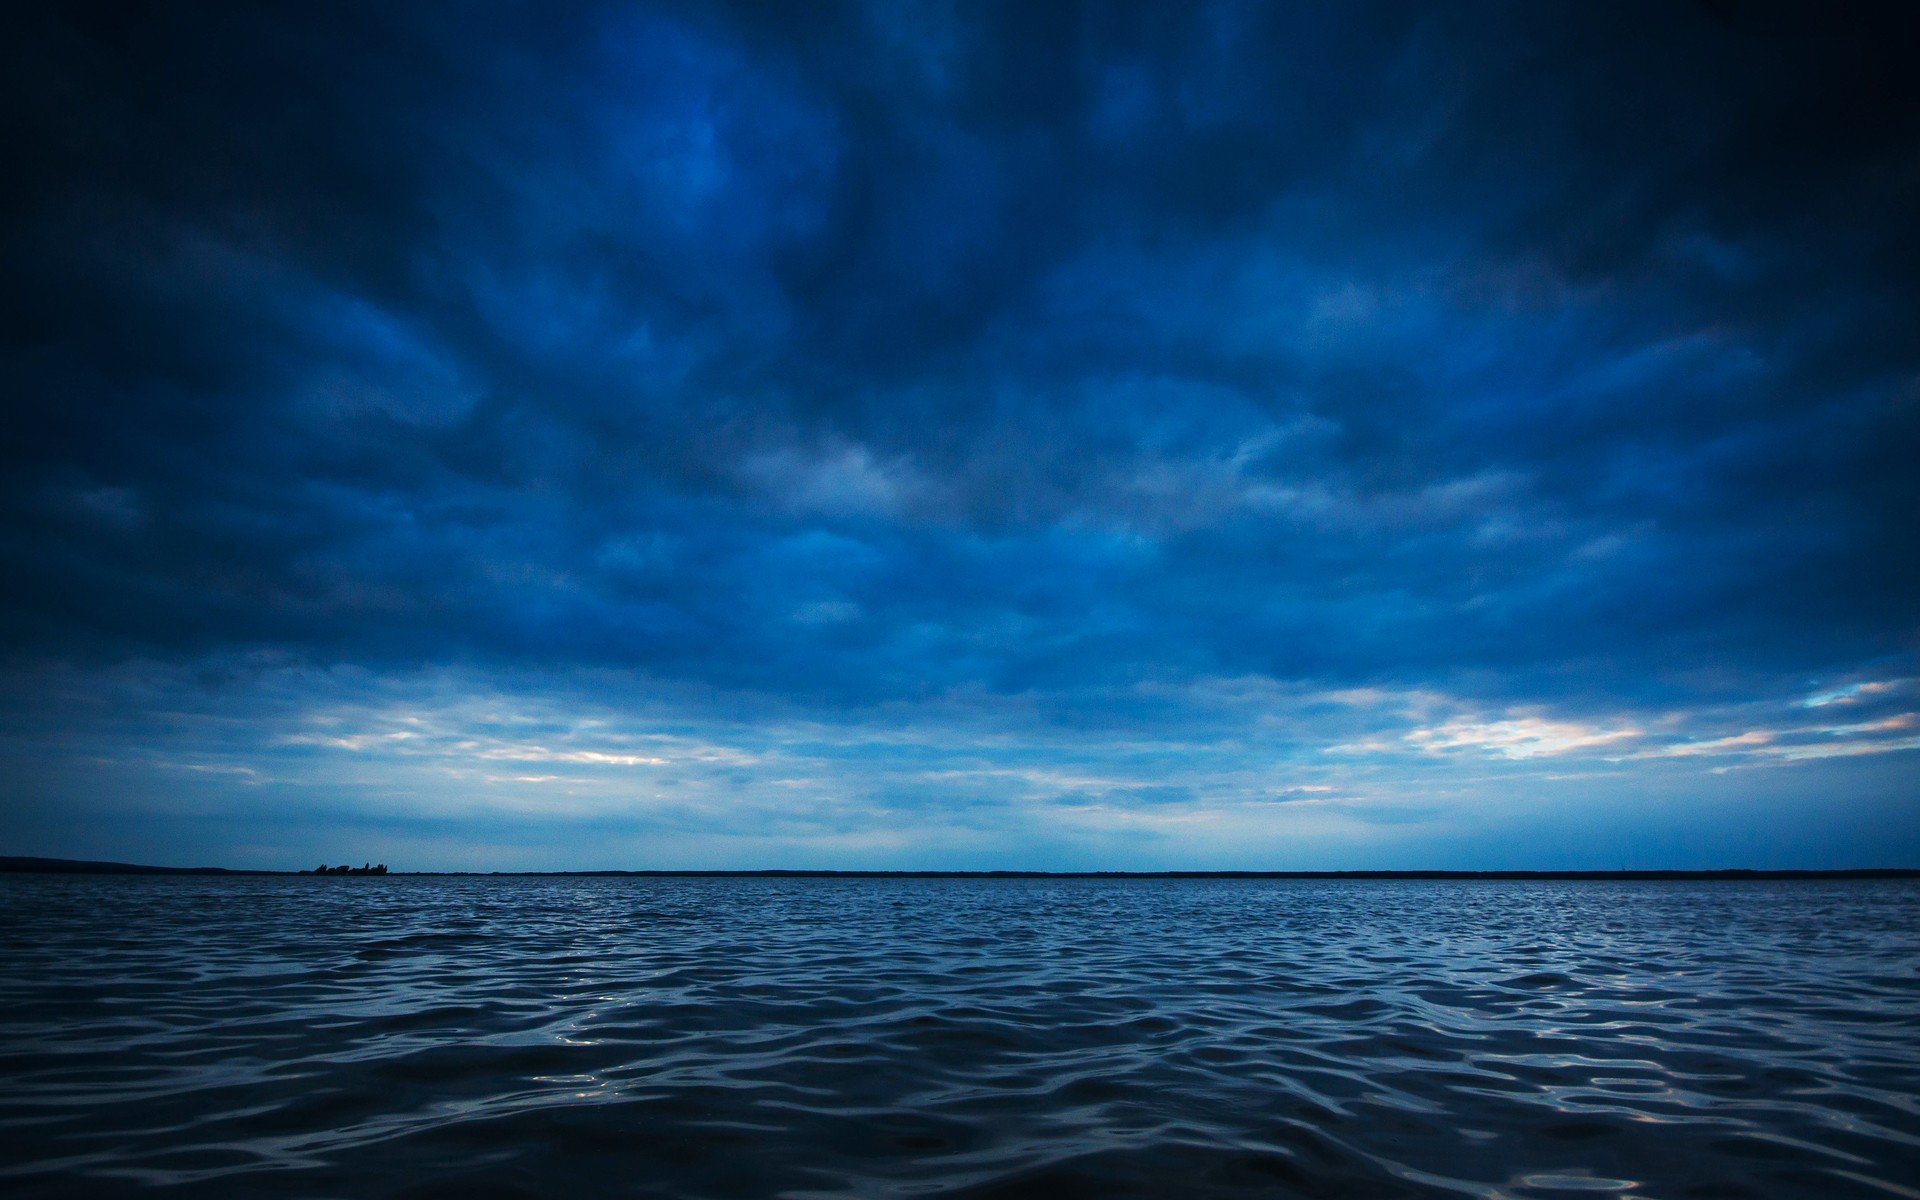 water, Blue, Ocean, Clouds, Horizon, Waves, Lakes, Waterscapes, Sea